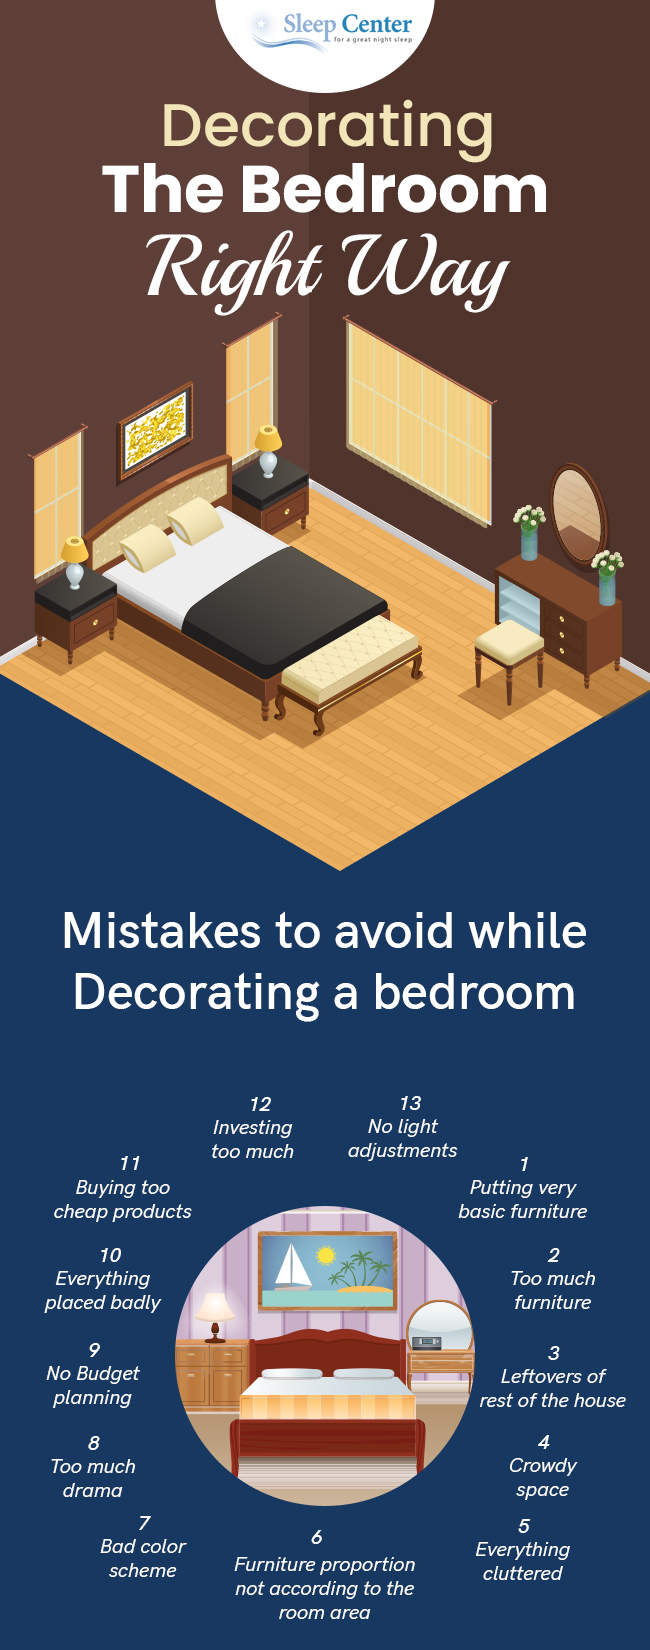 Decorating The Bedroom – Right Way